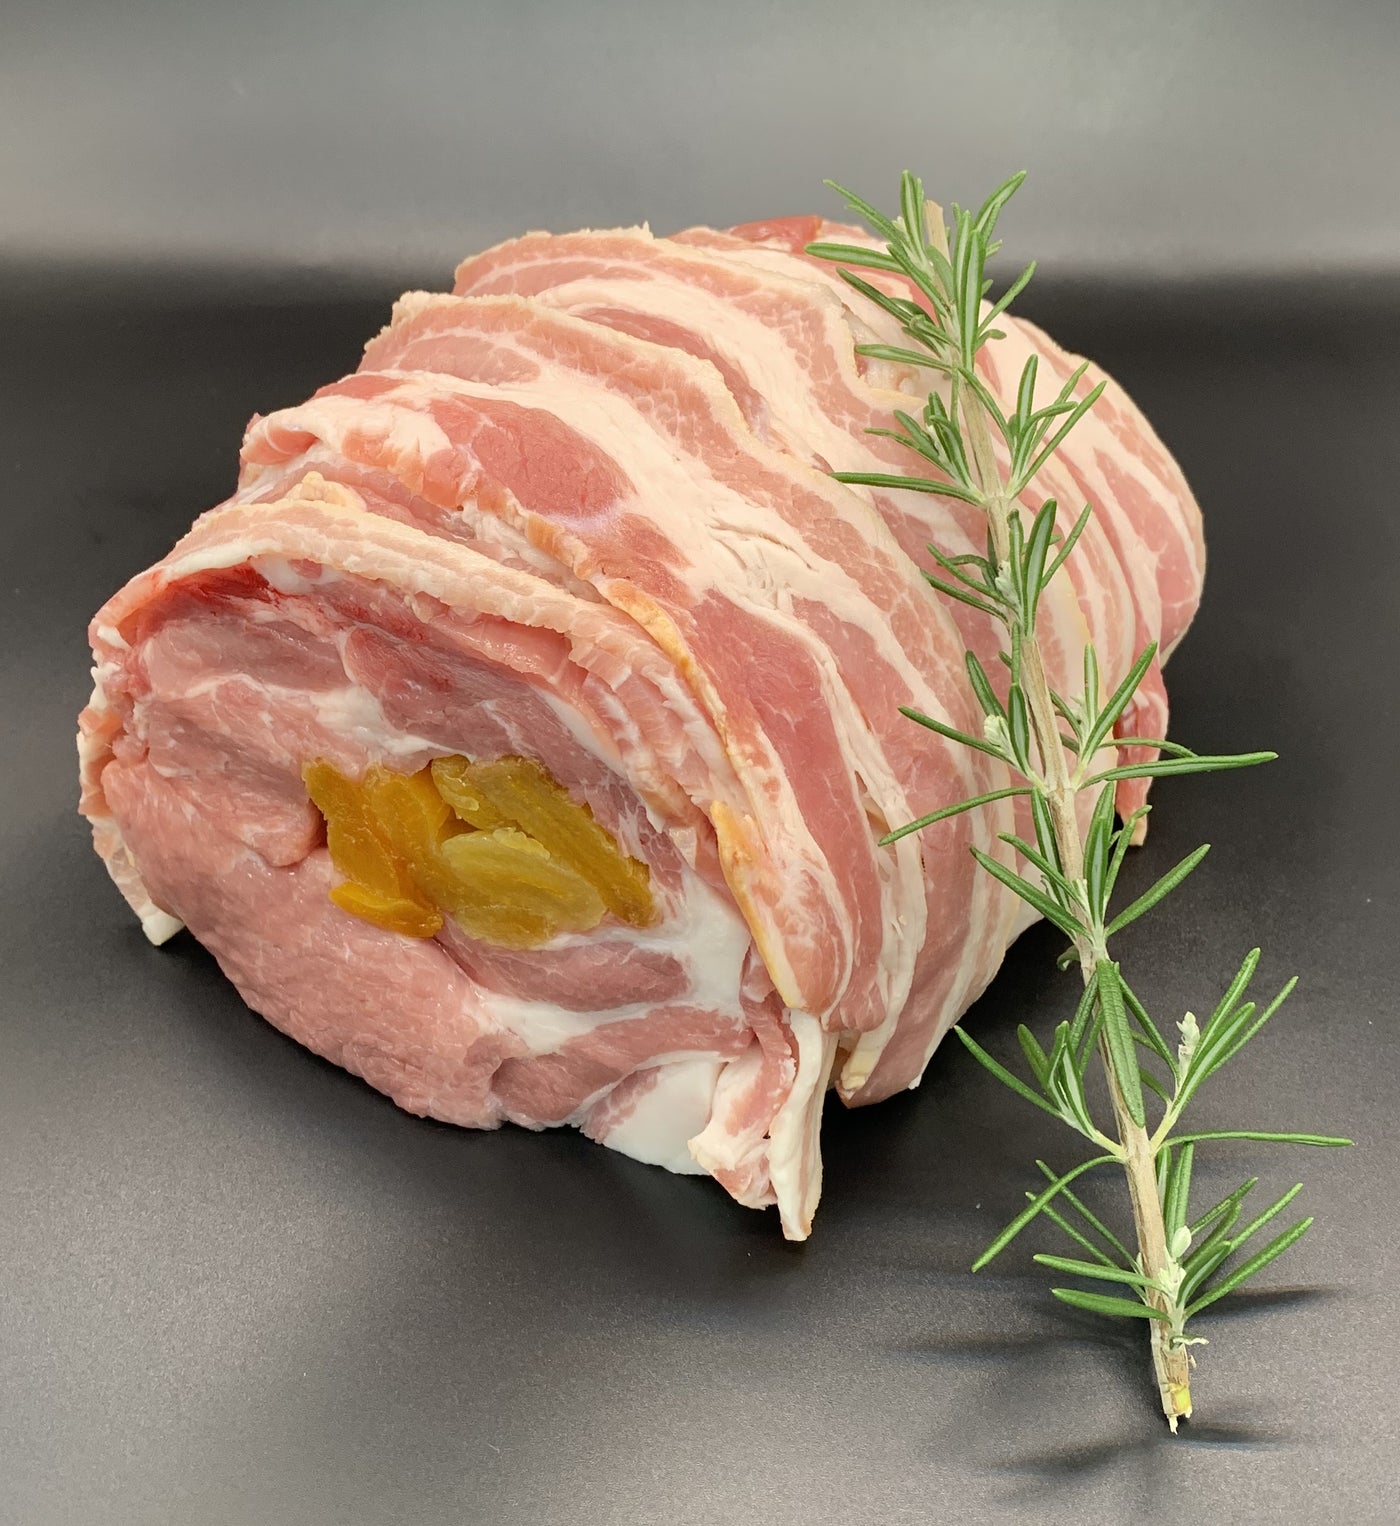 Dingley-Dell Free-Range Apricot Stuffed Pork Shoulder Wrapped in Bacon